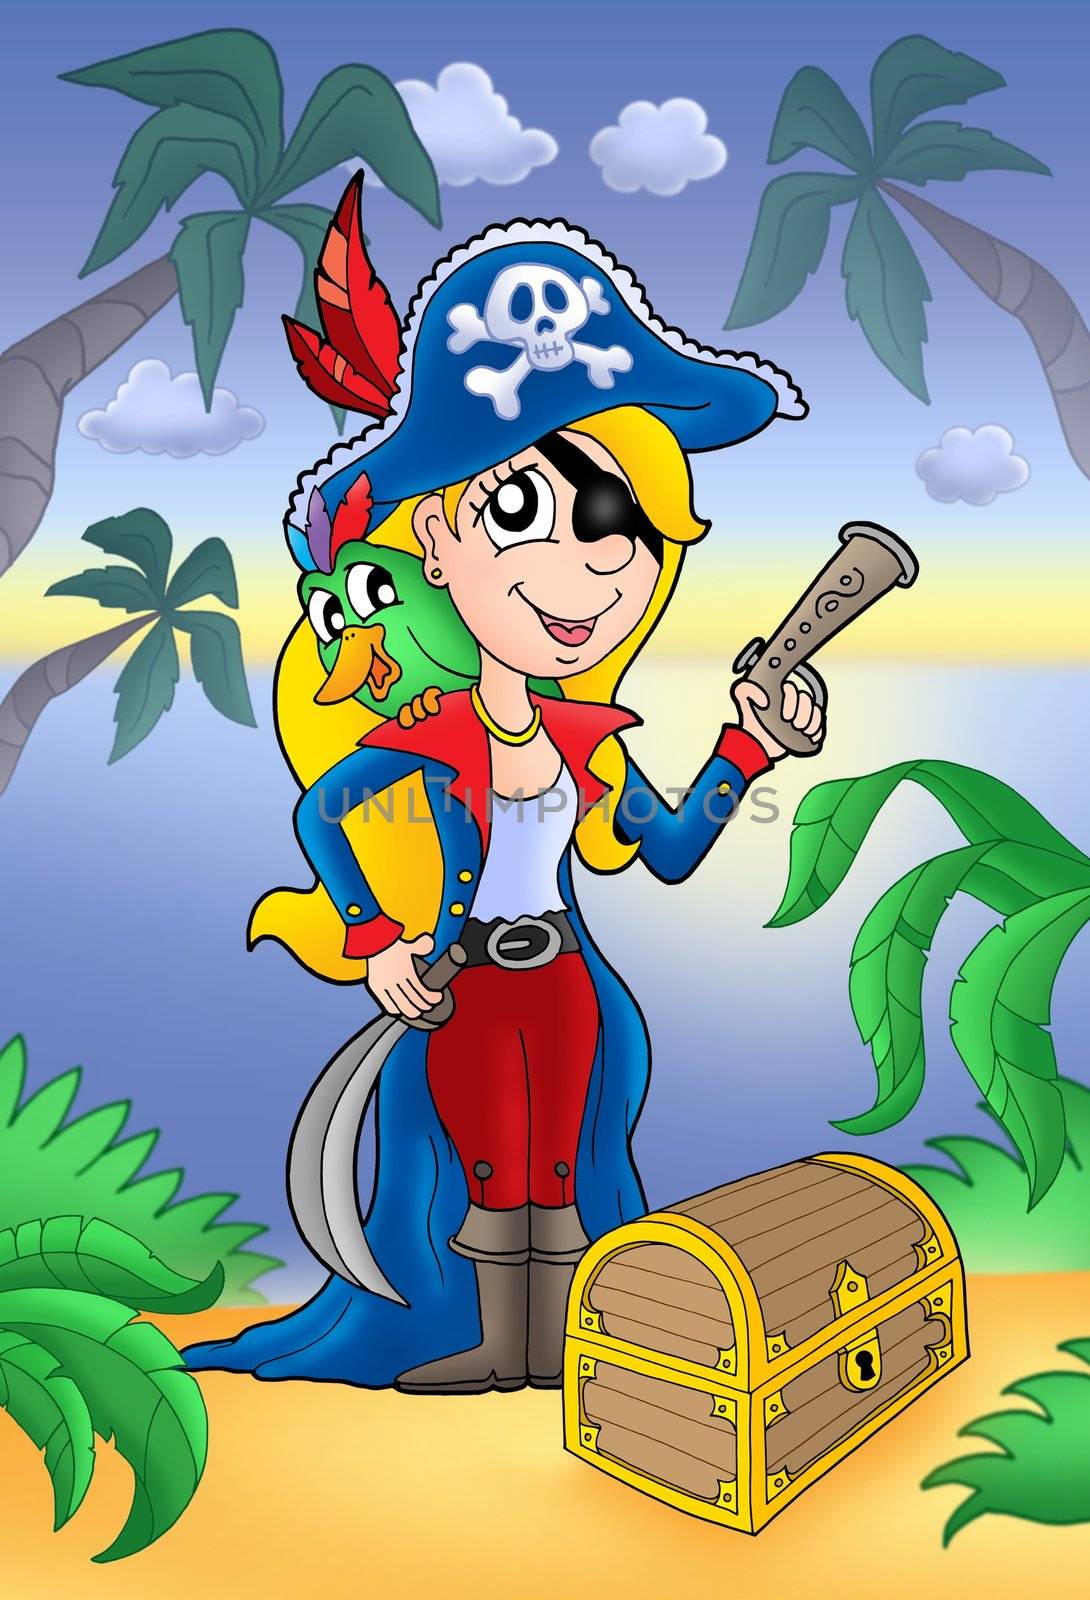 Blond pirate woman with treasure chest - color illustration.